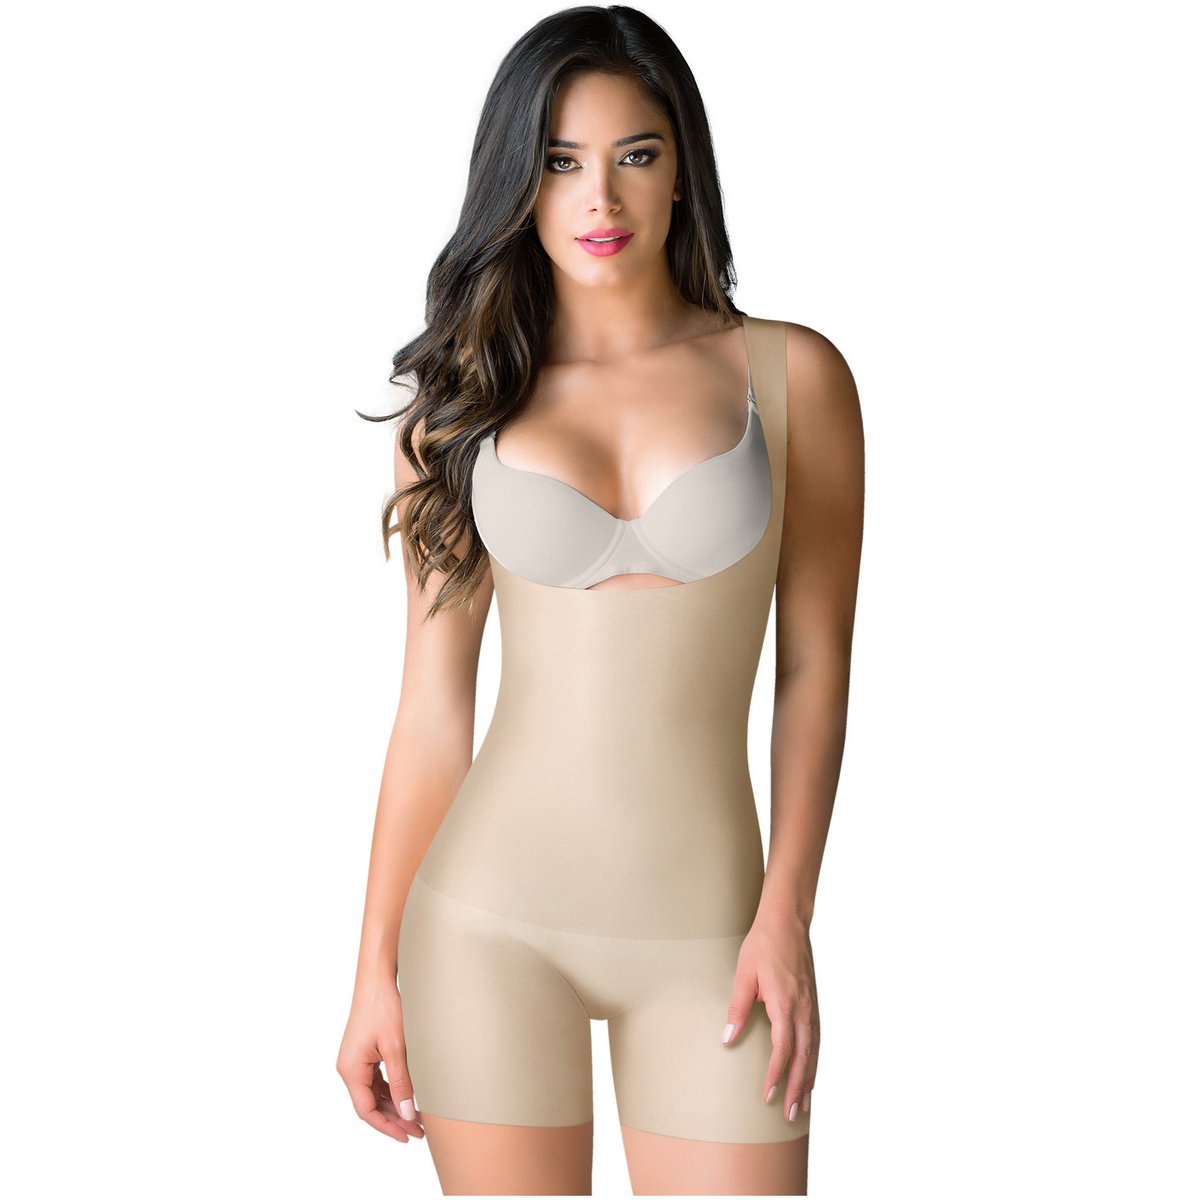 Order the most popular seamless, medium compression girdle today